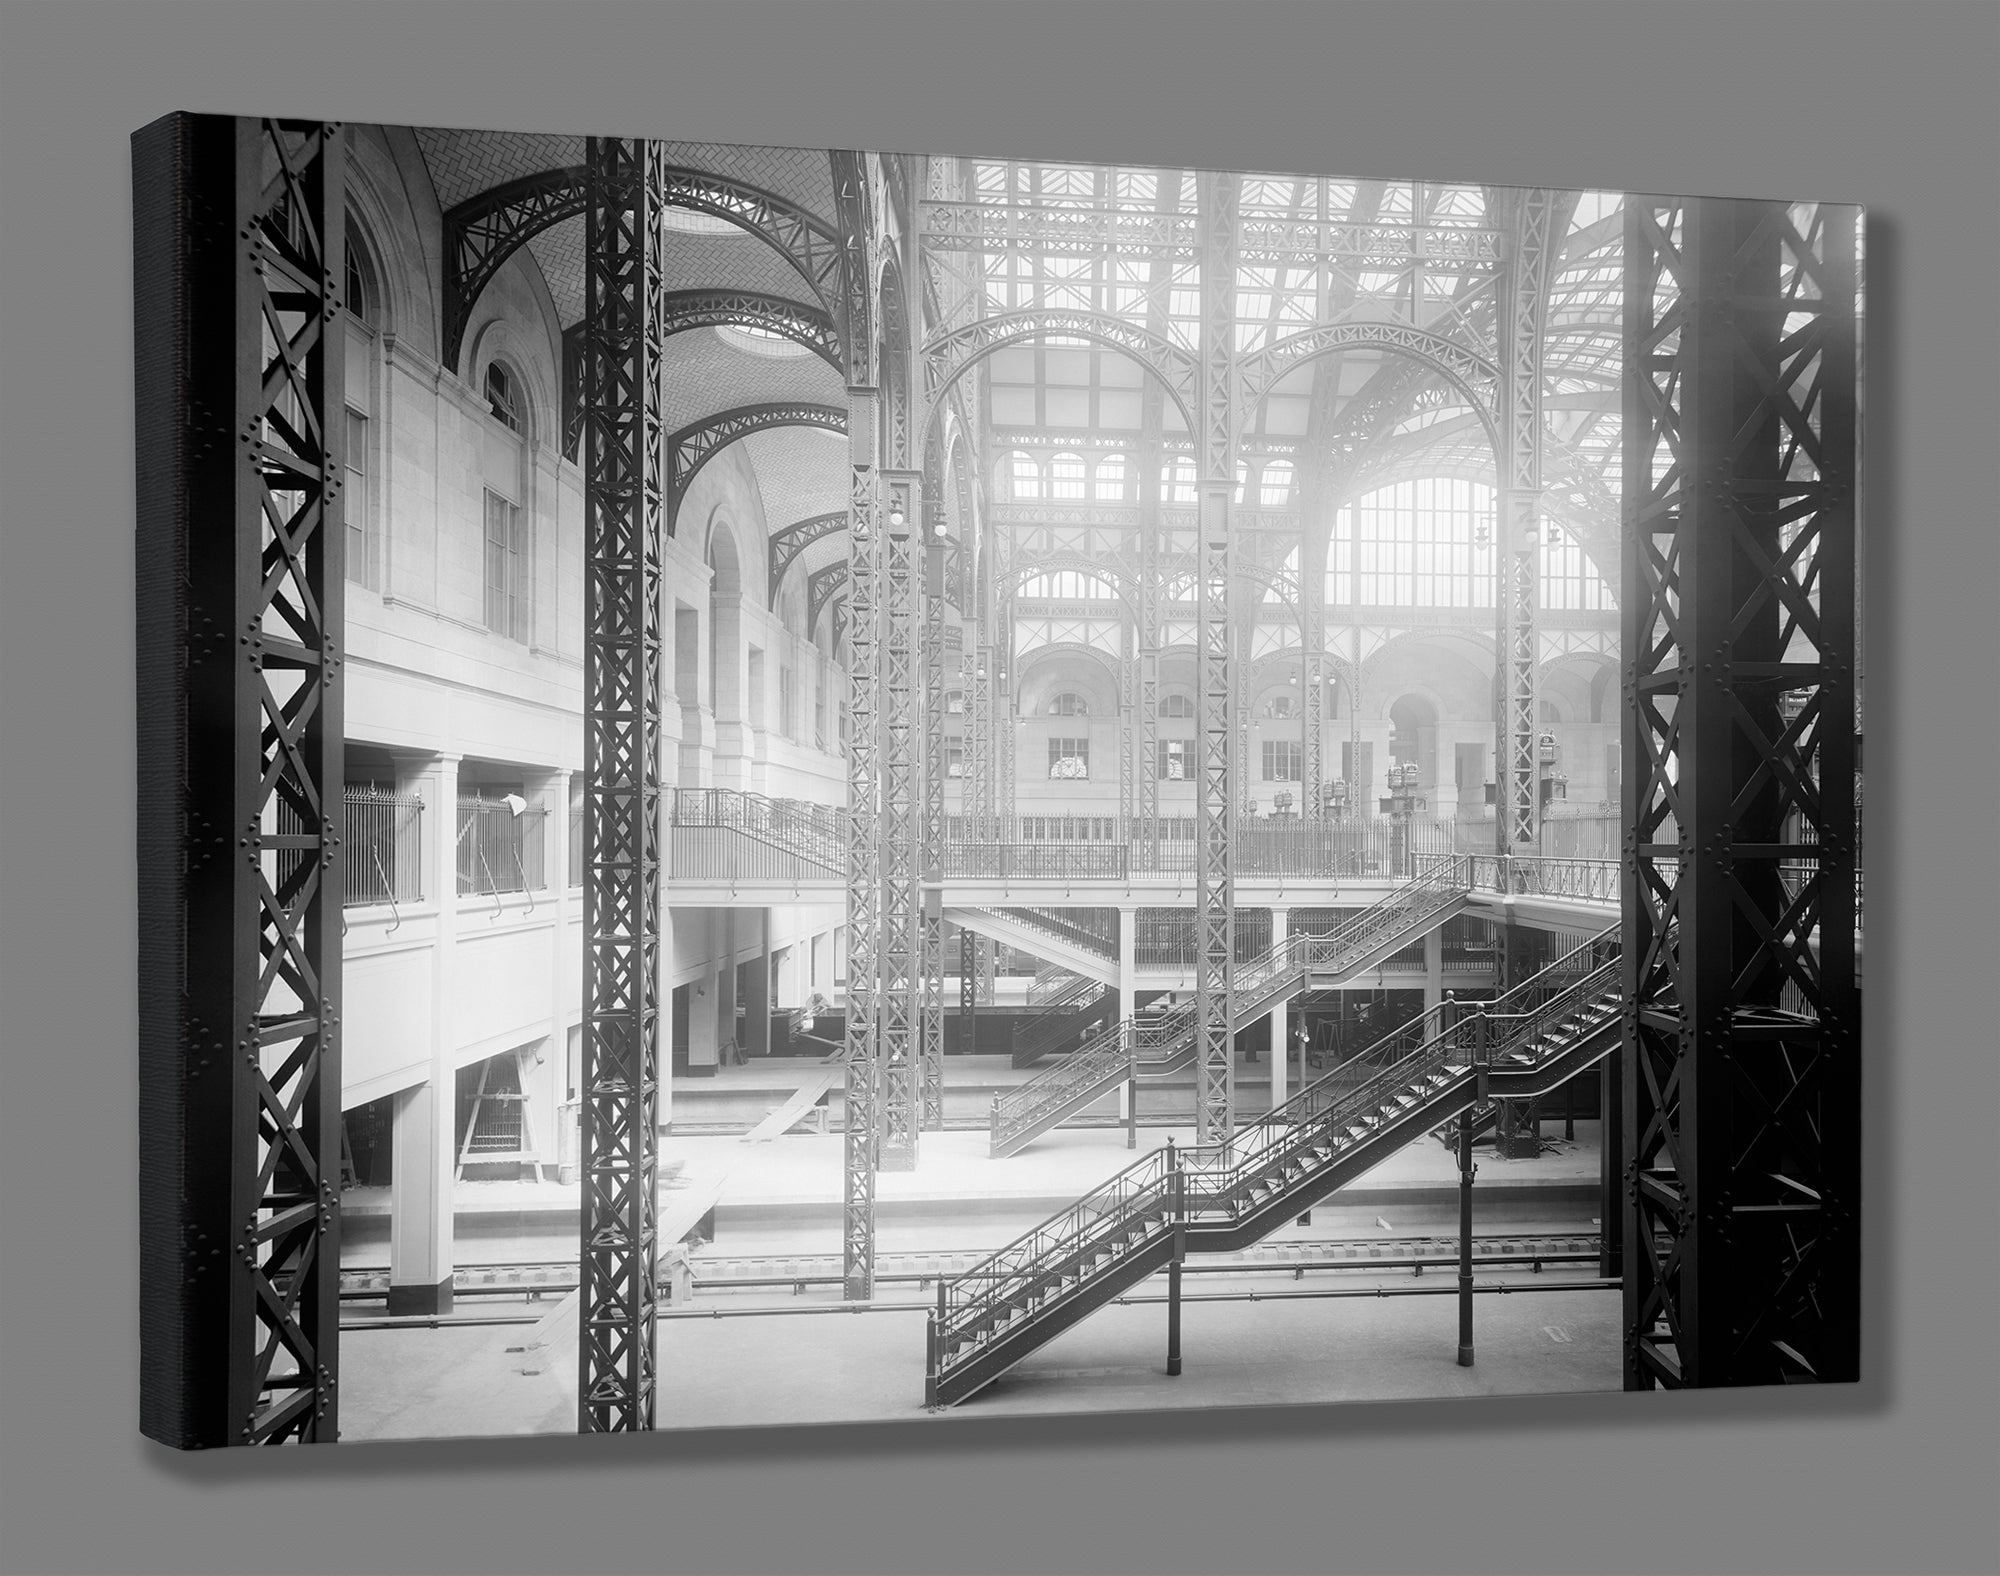 A stretched canvas print of a photograph of Penn Station in New York City